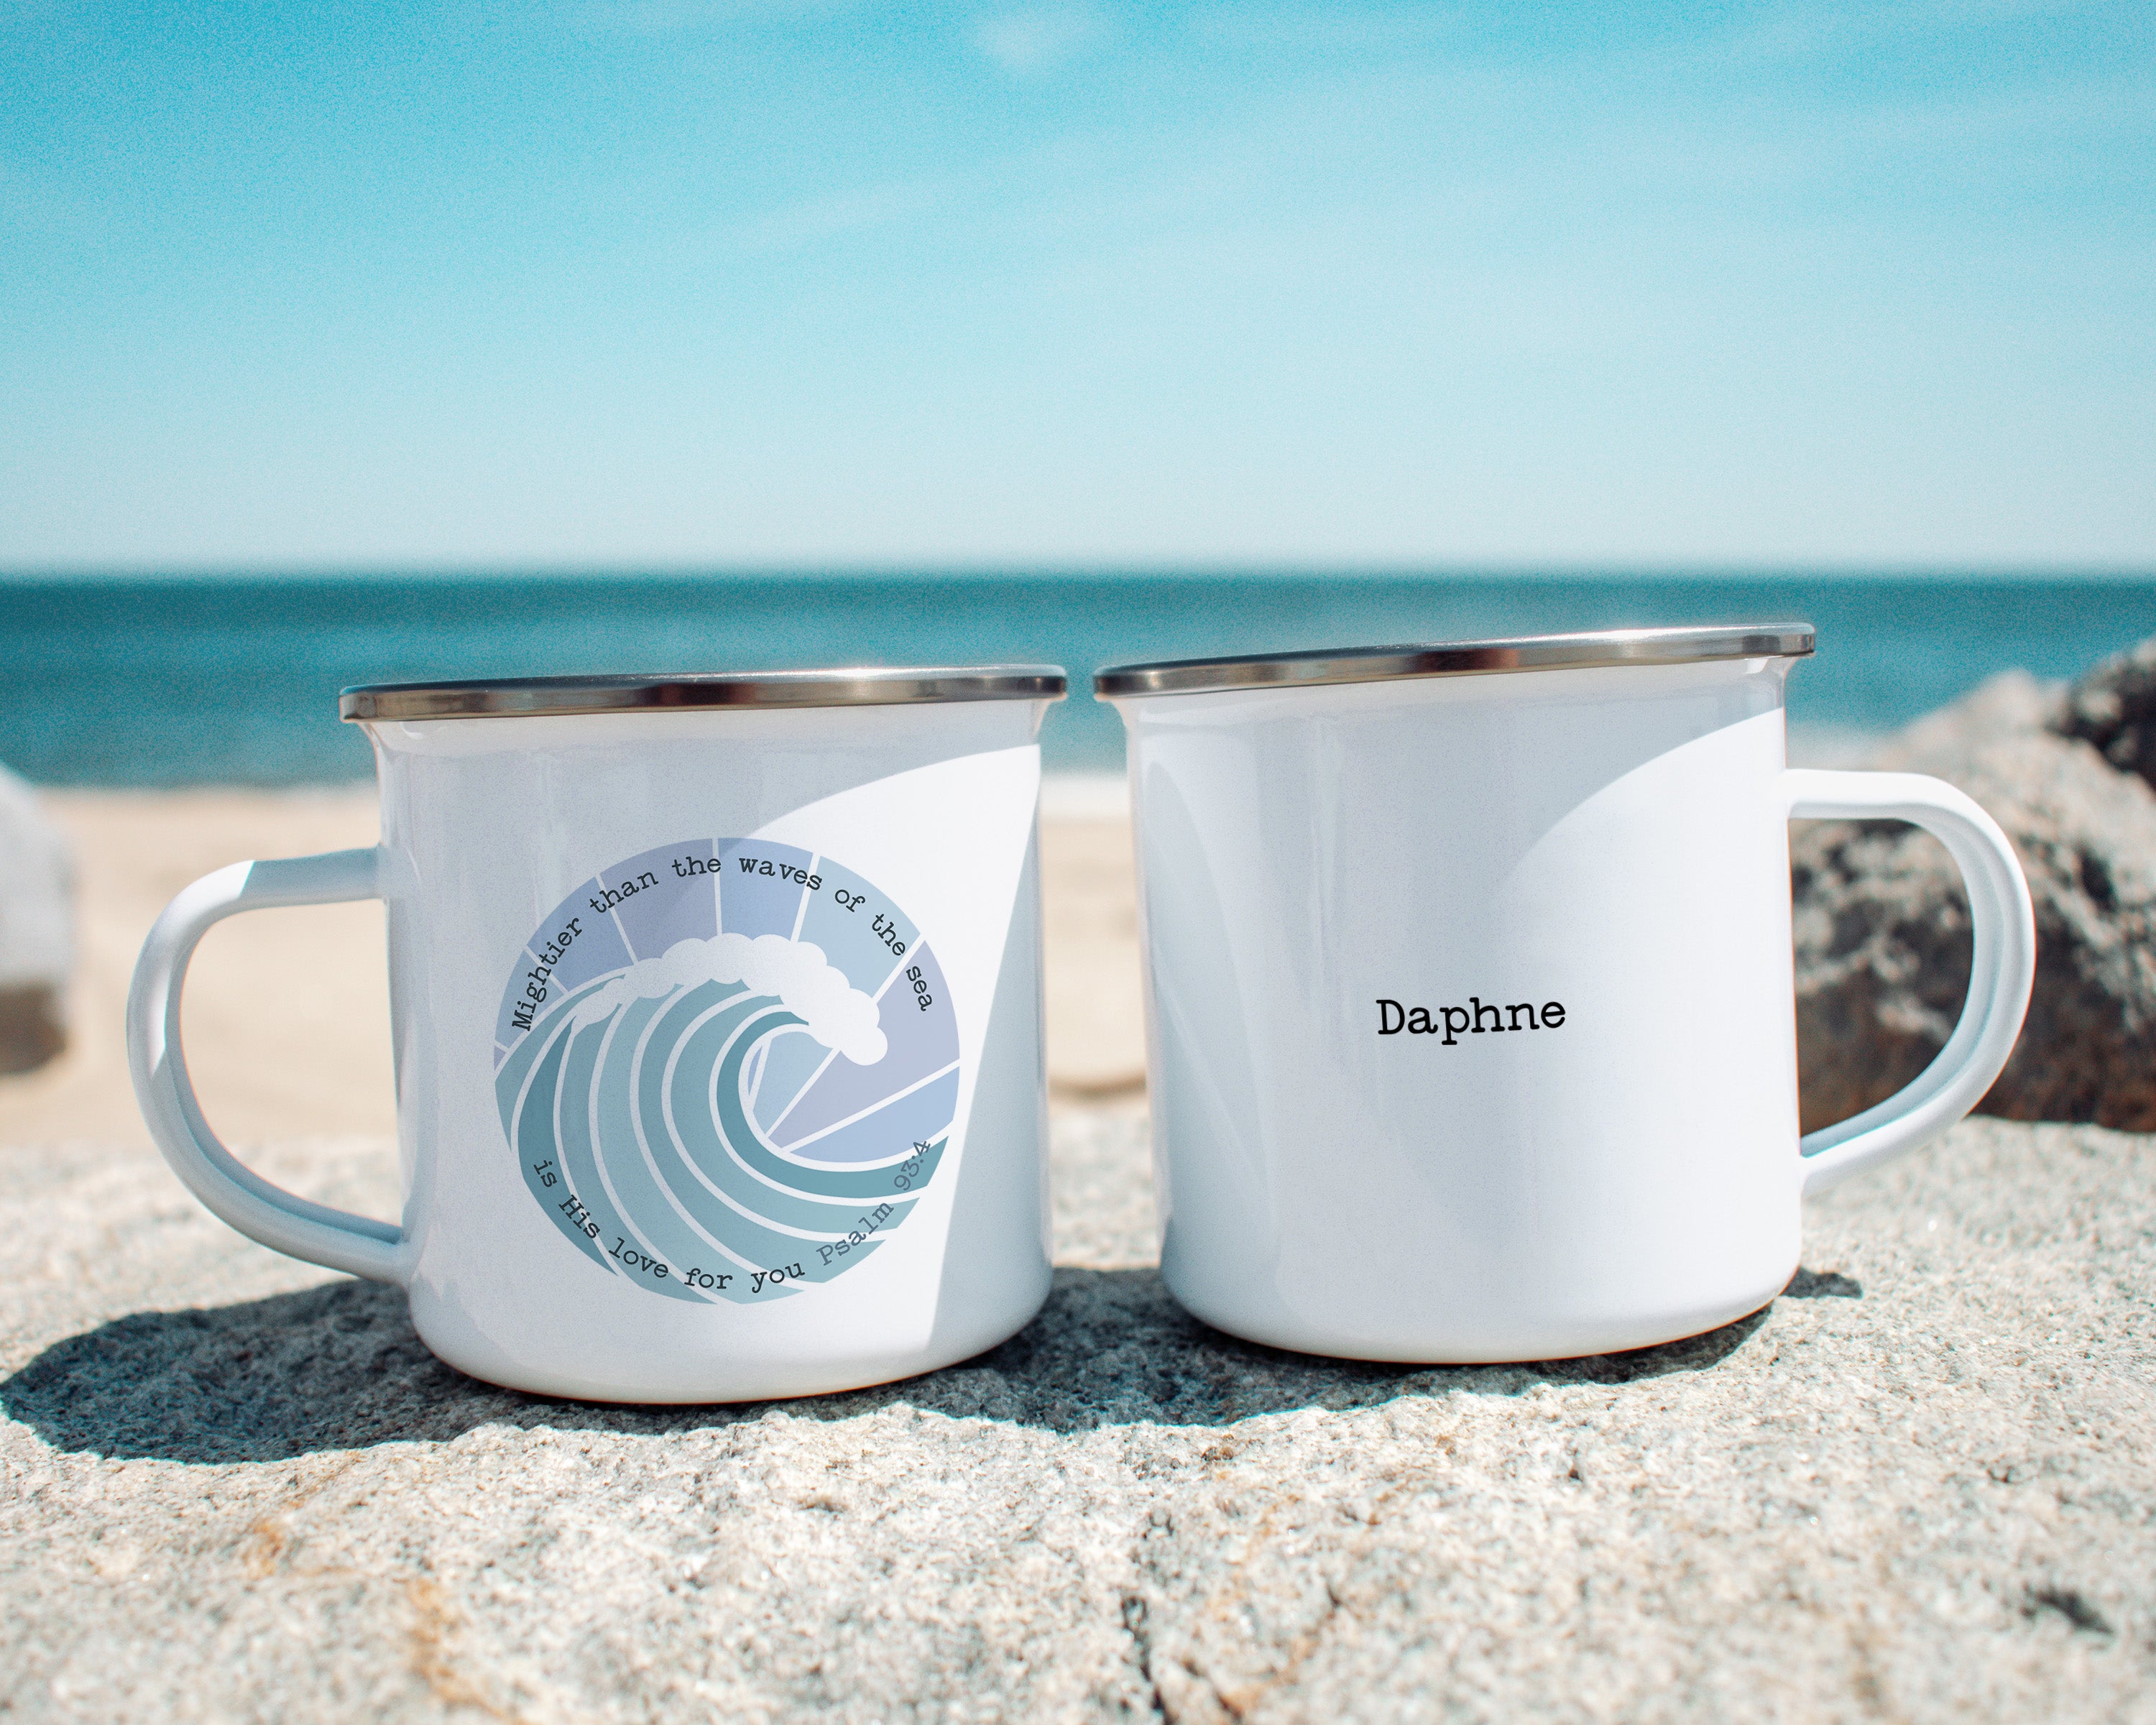 Mightier Than the Waves of the Sea Camp Mug